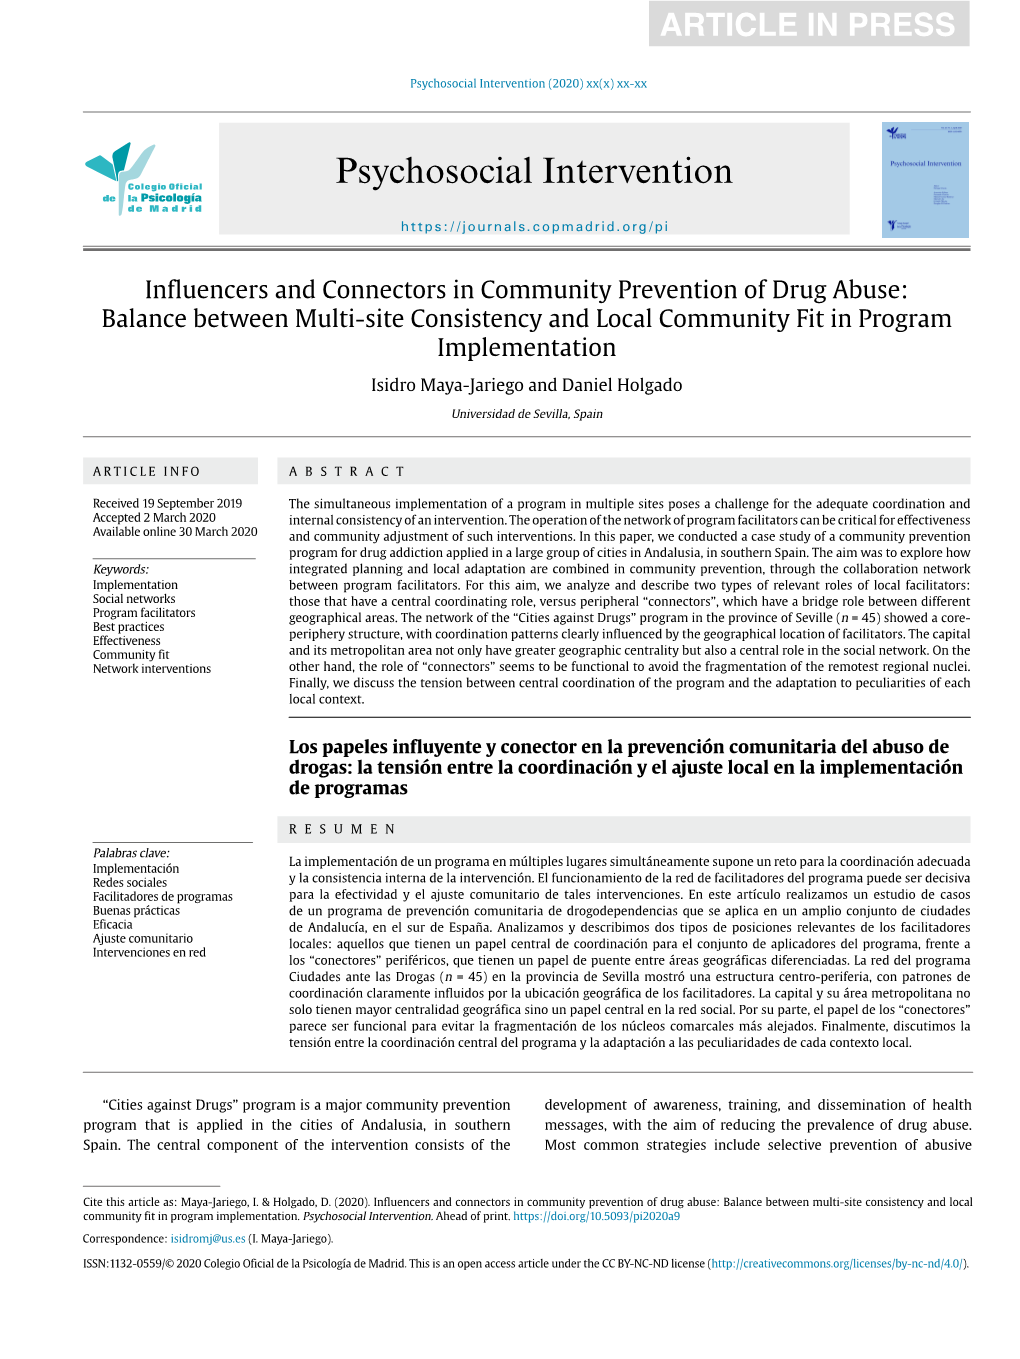 Influencers and Connectors in Community Prevention of Drug Abuse